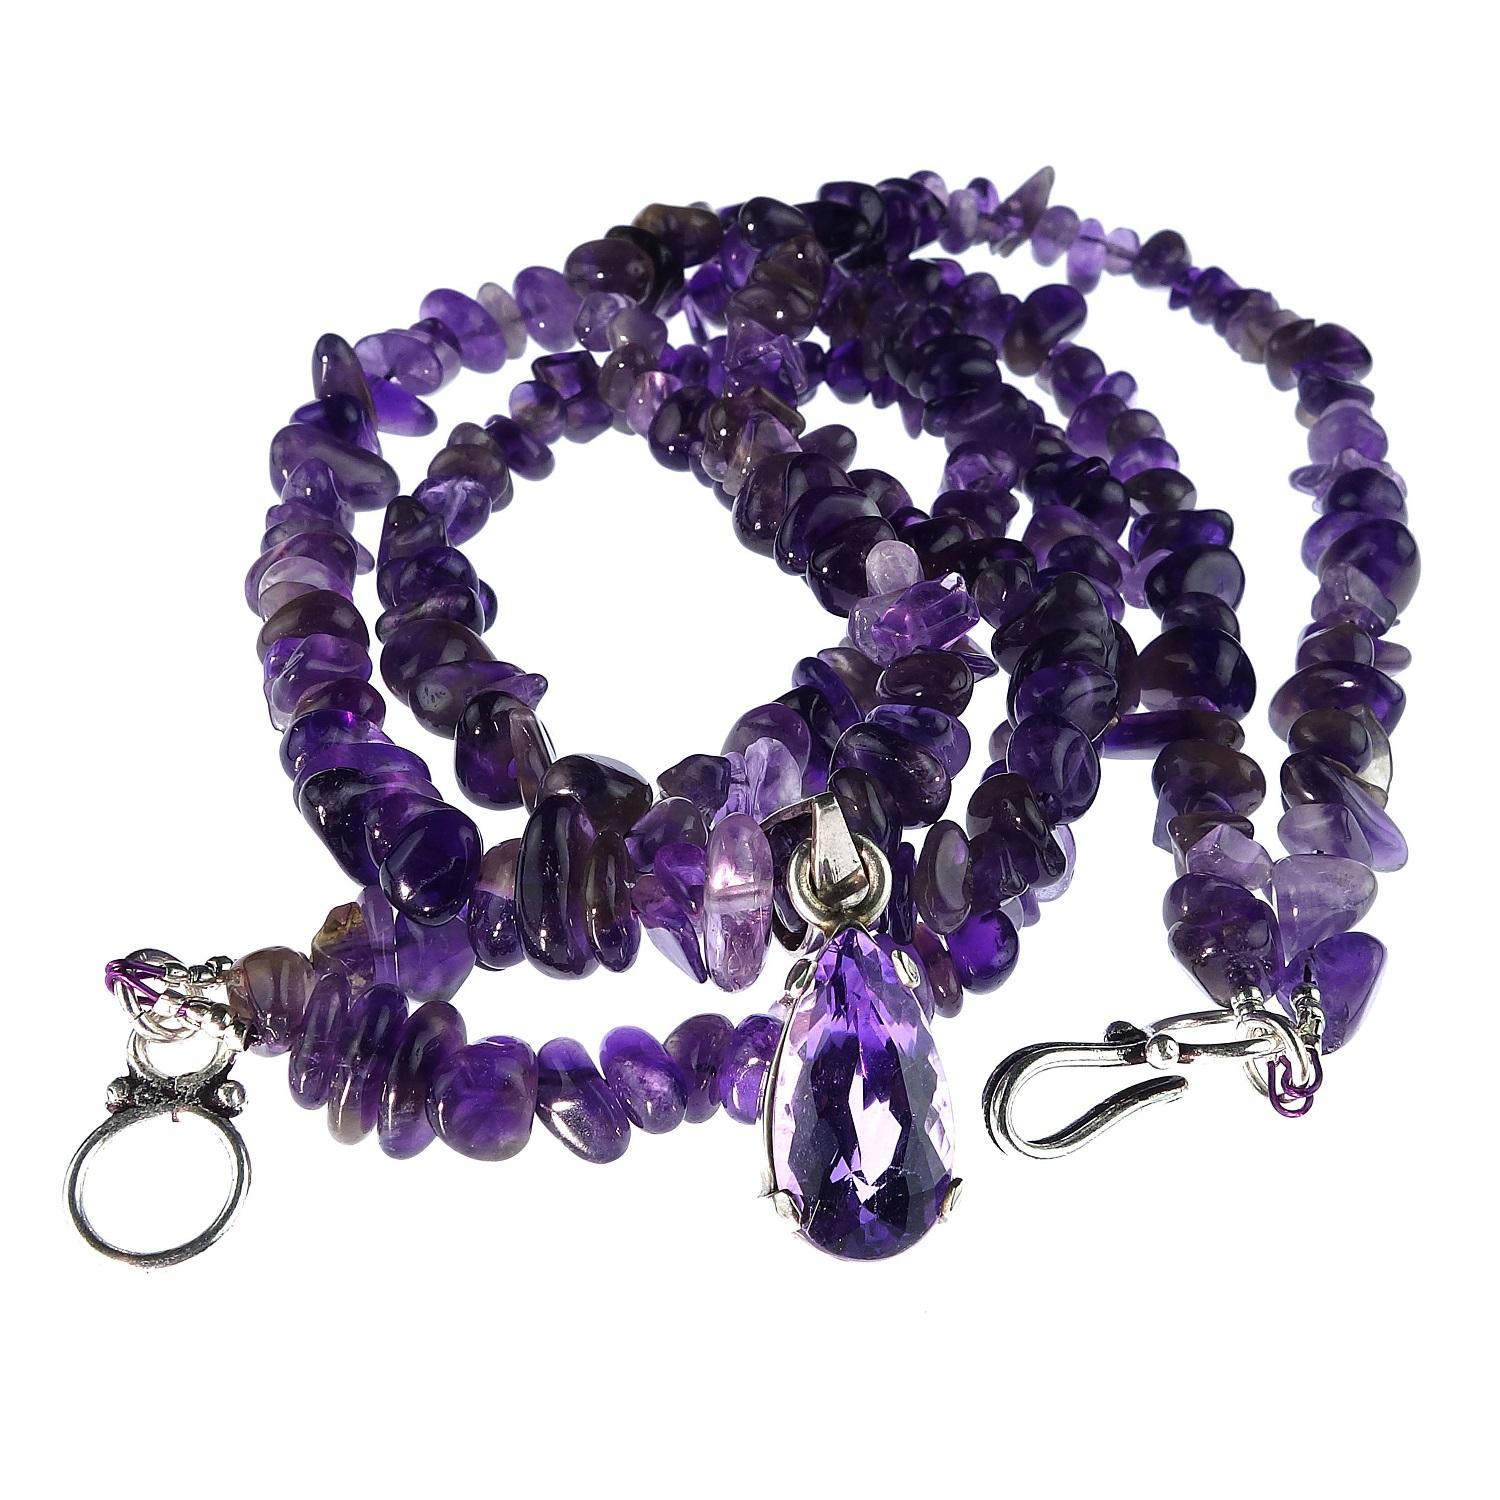 Double Strand Amethyst Necklace with Amethyst Pendant February Birthstone 1